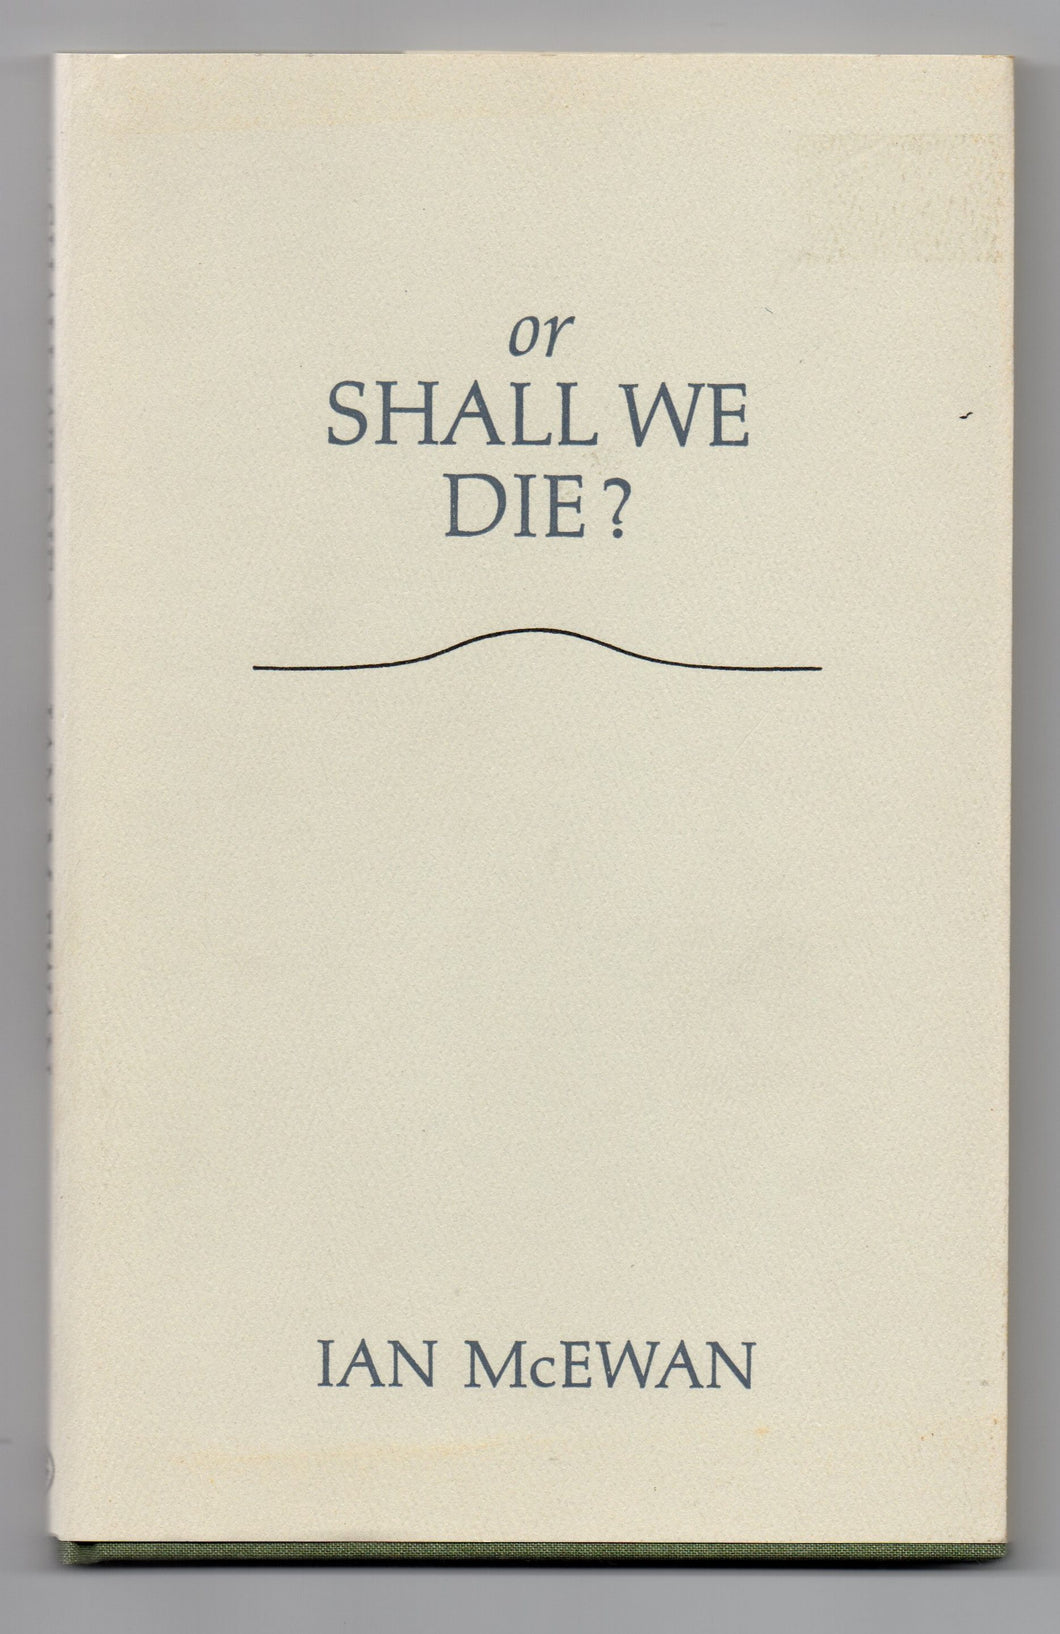 Or Shall We Die? Words for an oratorio set to music by Michael Berkeley